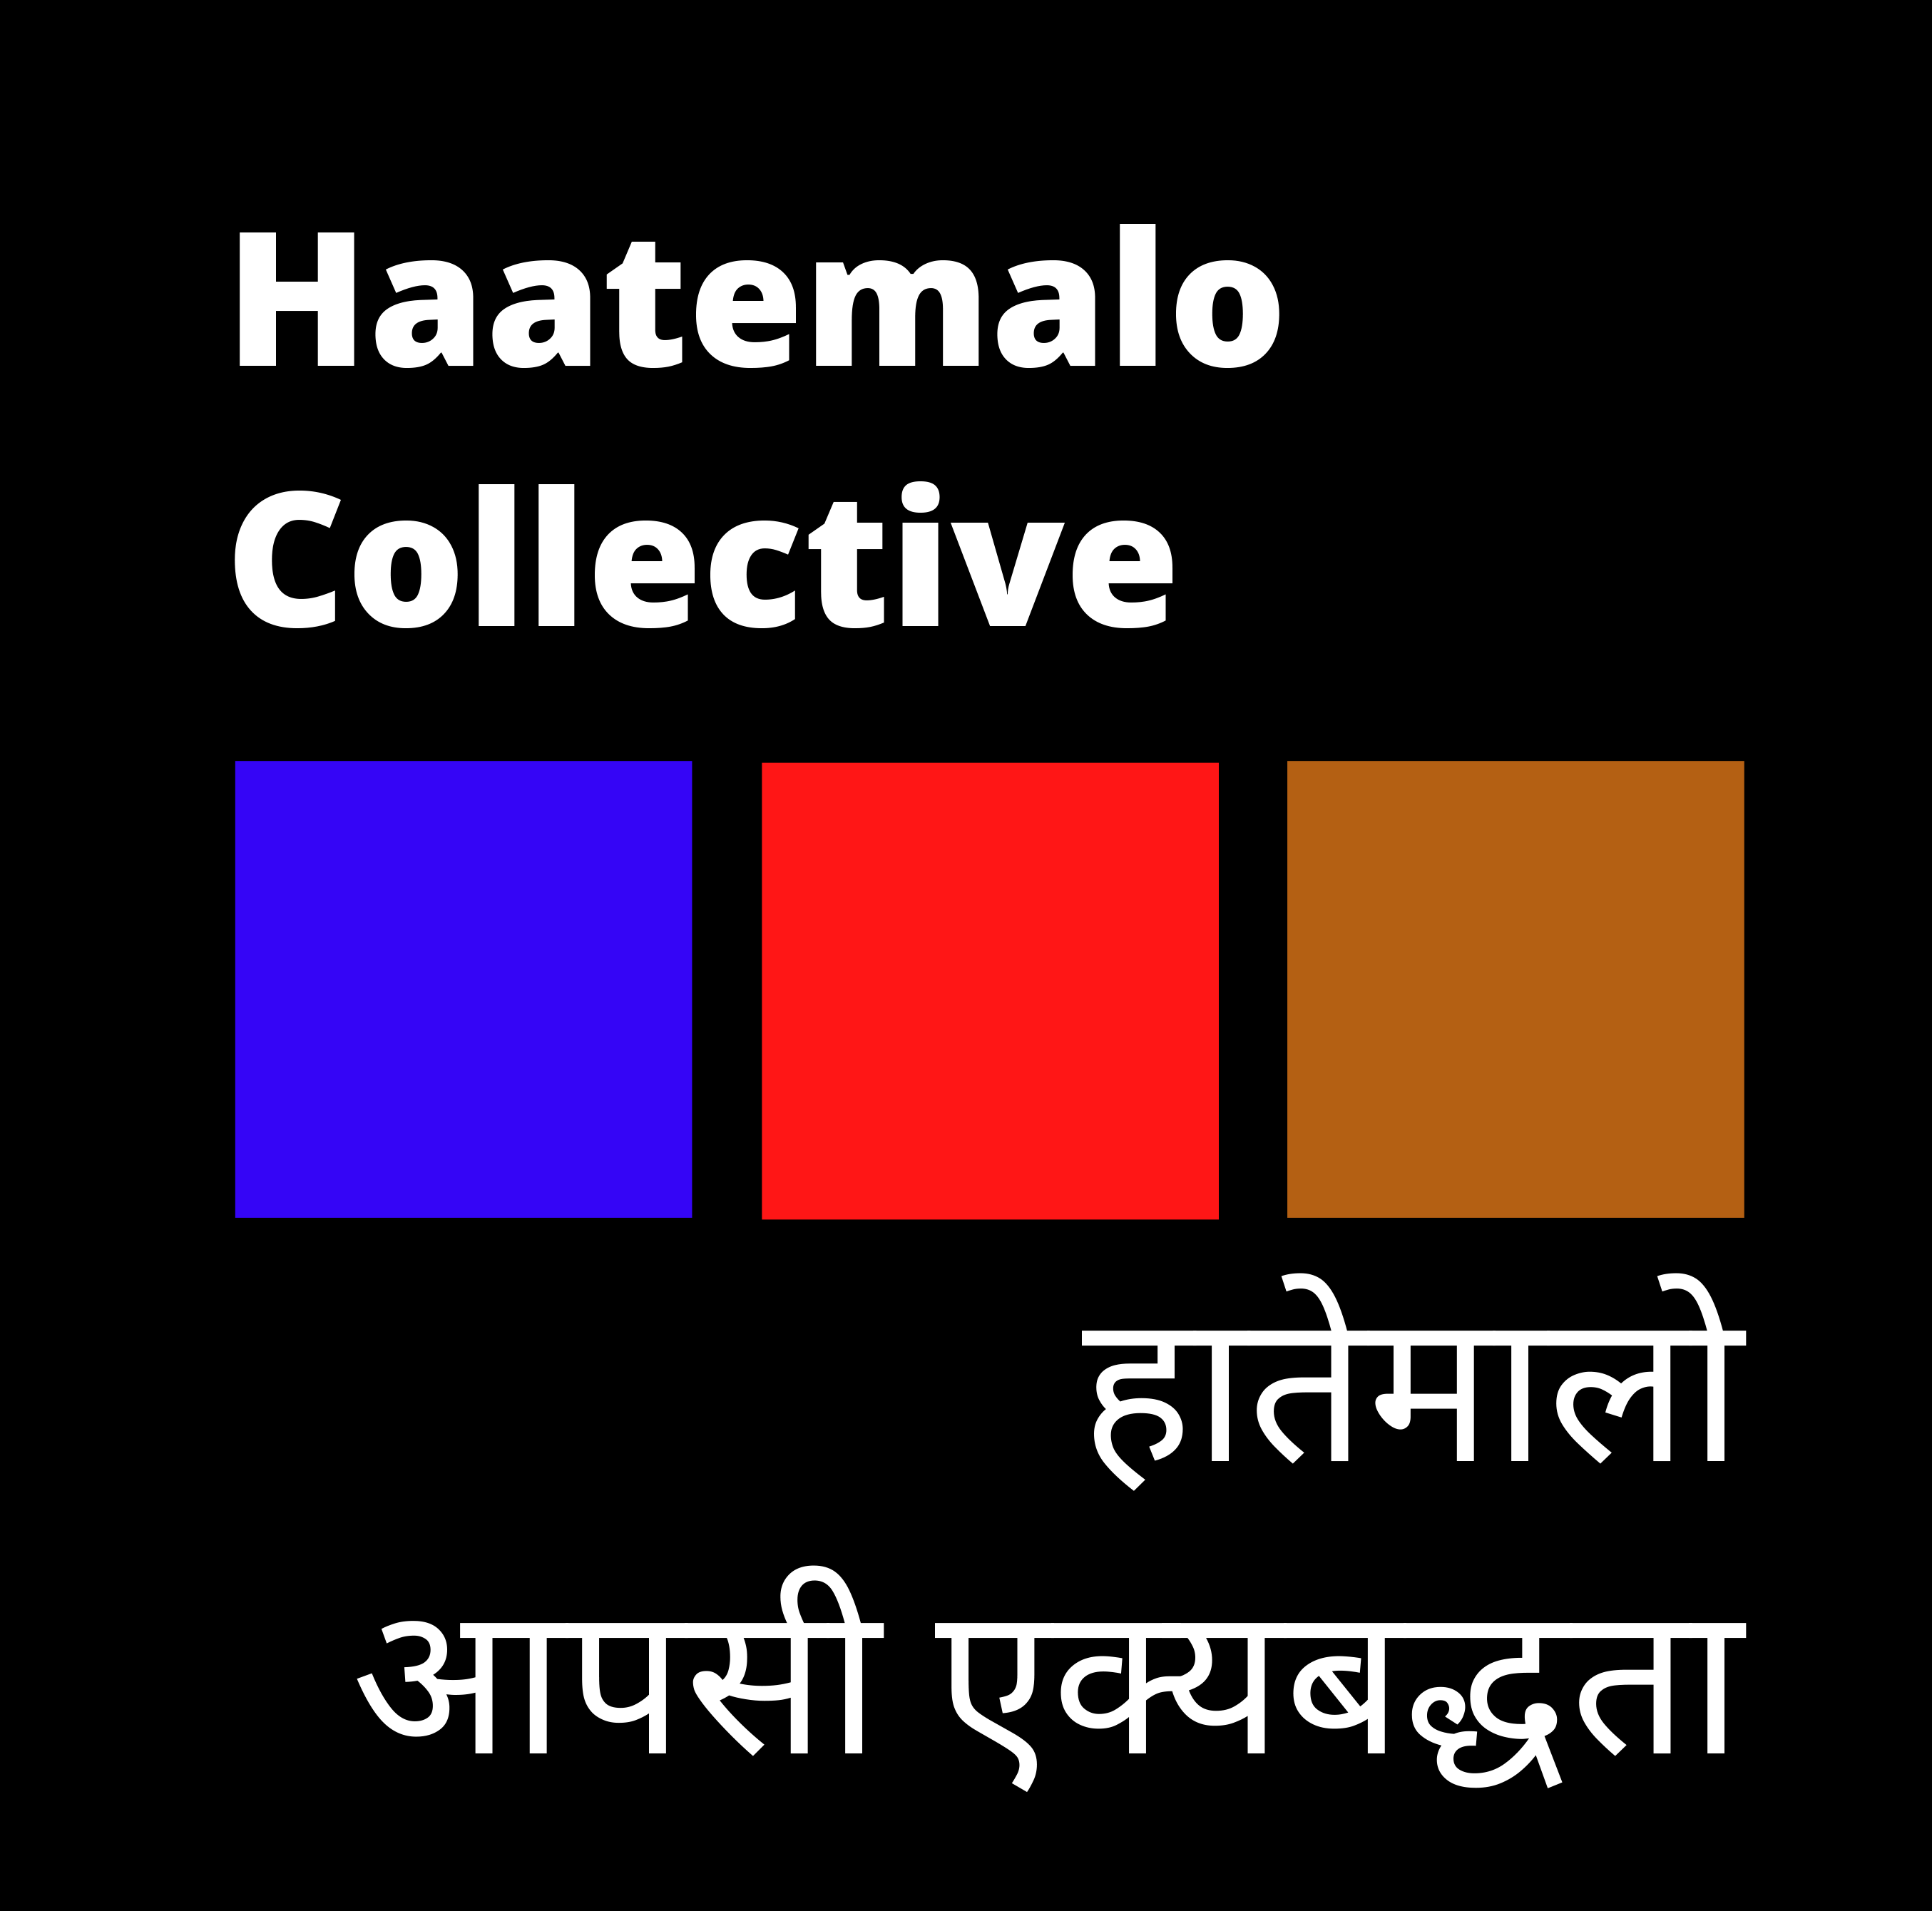 Haatemalo Collective